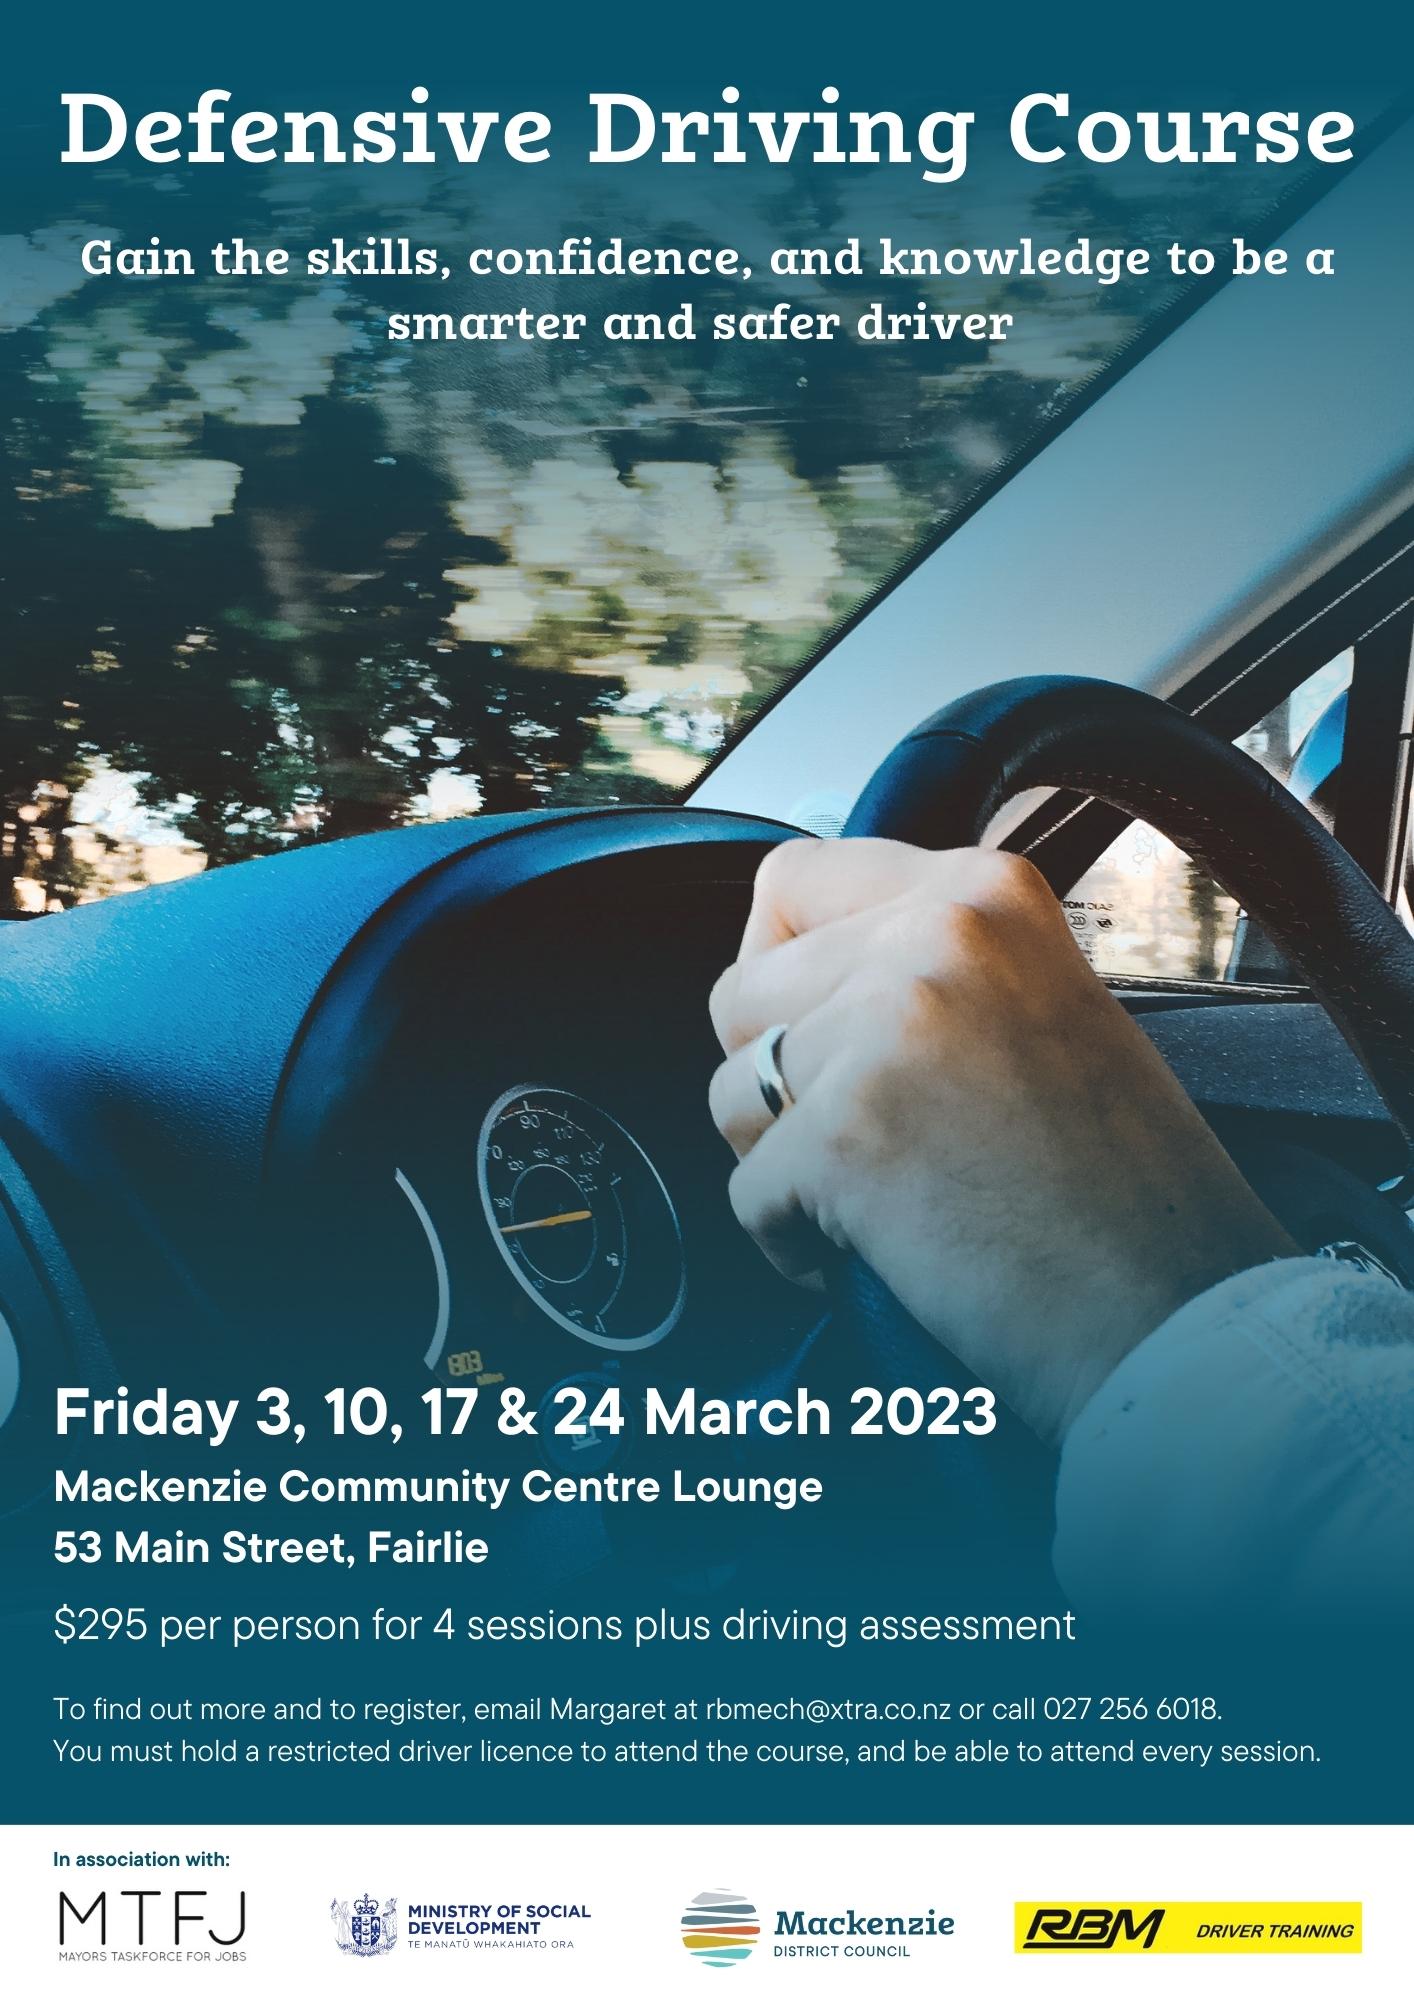 Defensive Driving poster - March 2023 